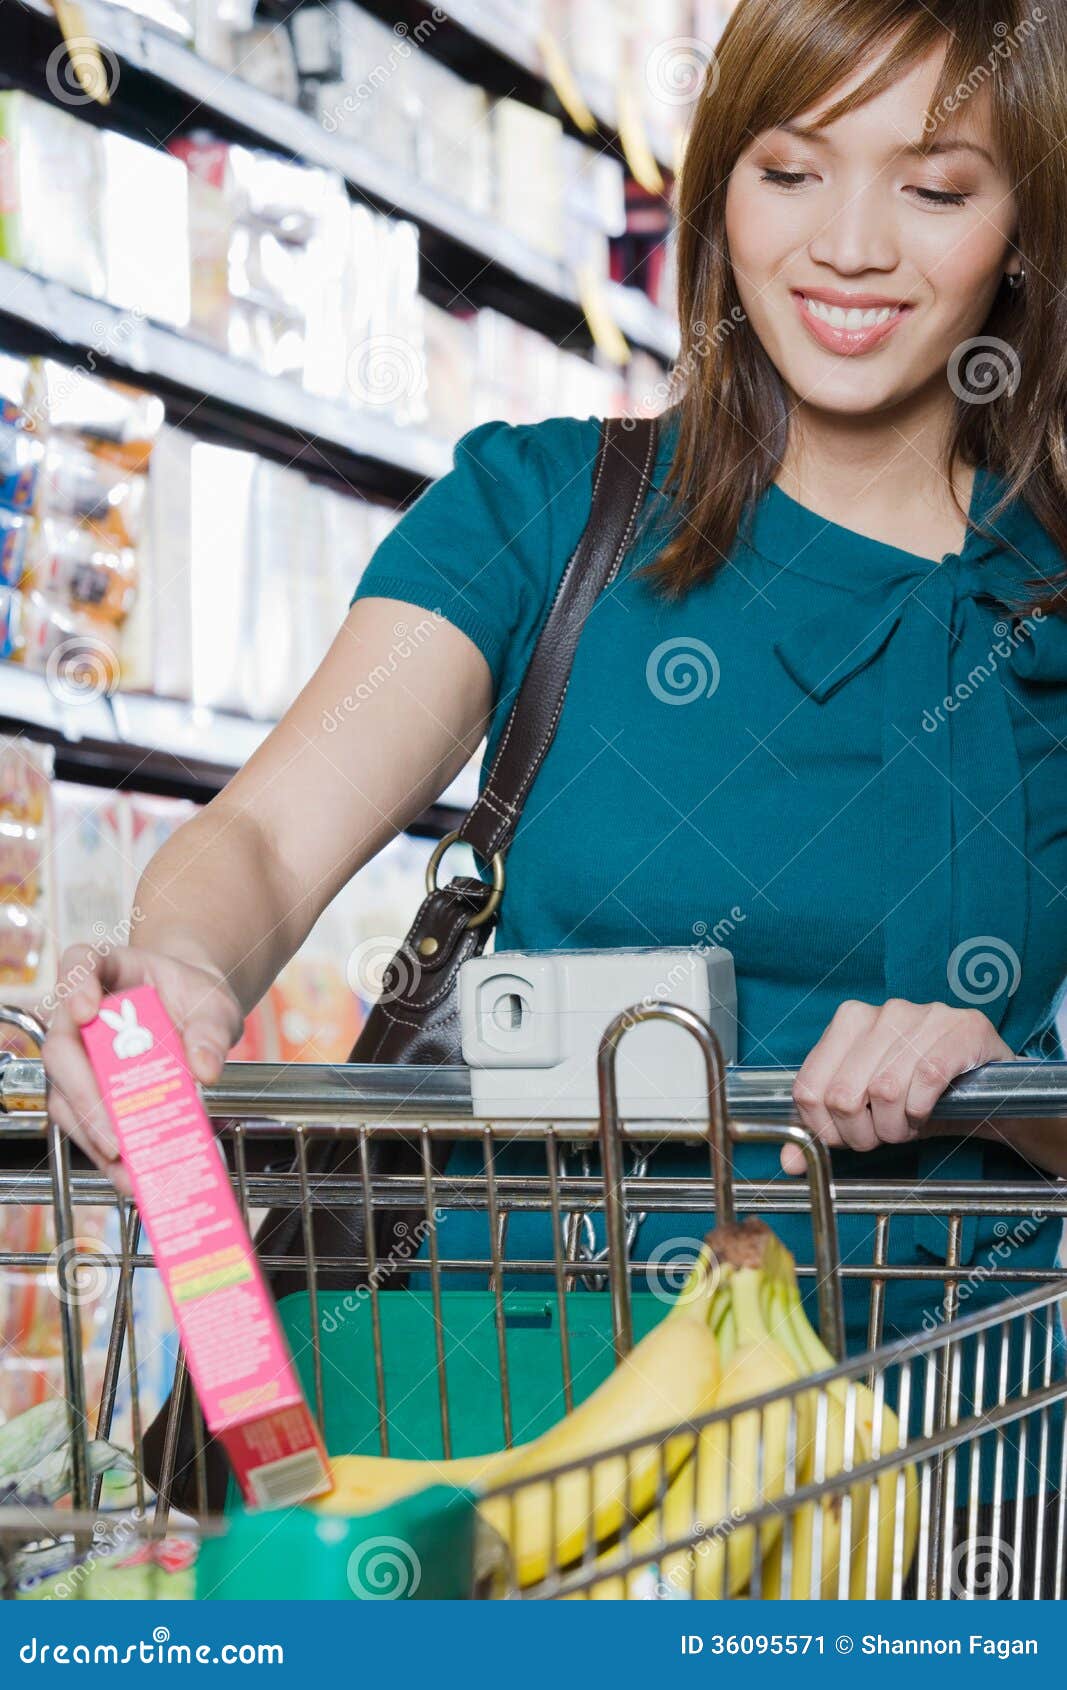 young woman putting a packet in a shopping trolley